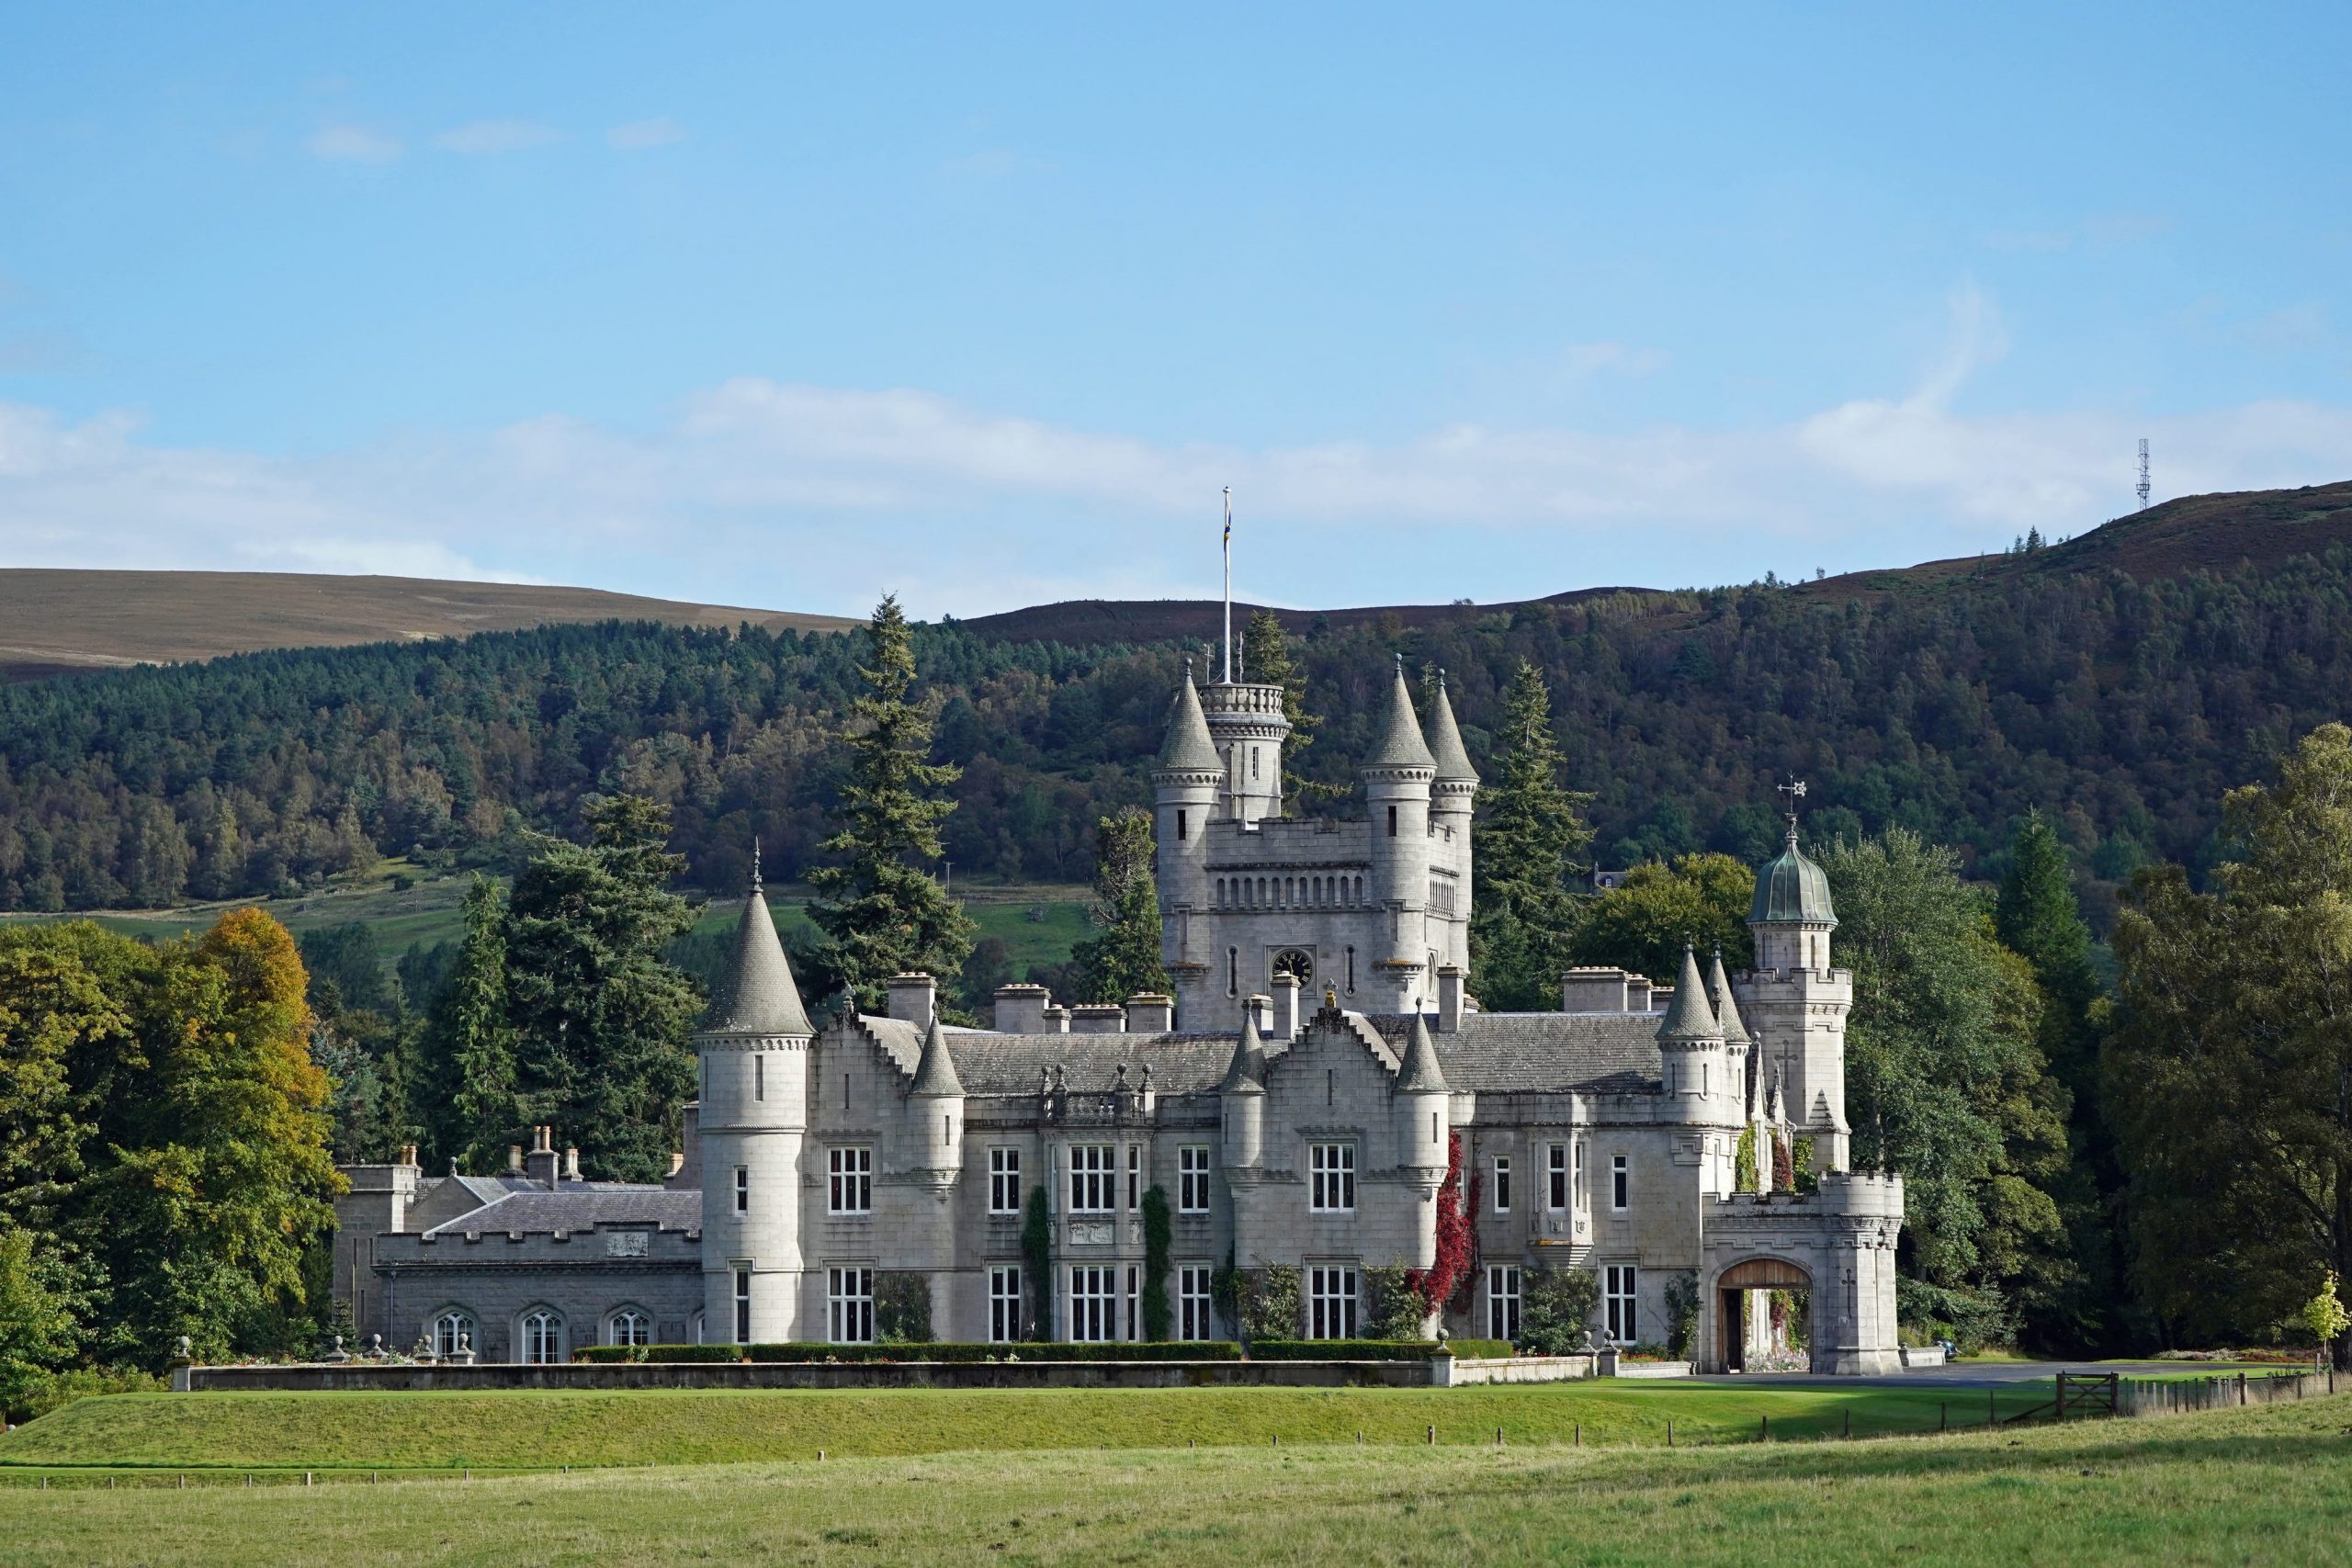 A general view of Balmoral Castle, which is one of the residences of the Royal family, and where Queen Elizabeth II traditionally spends the summer months.